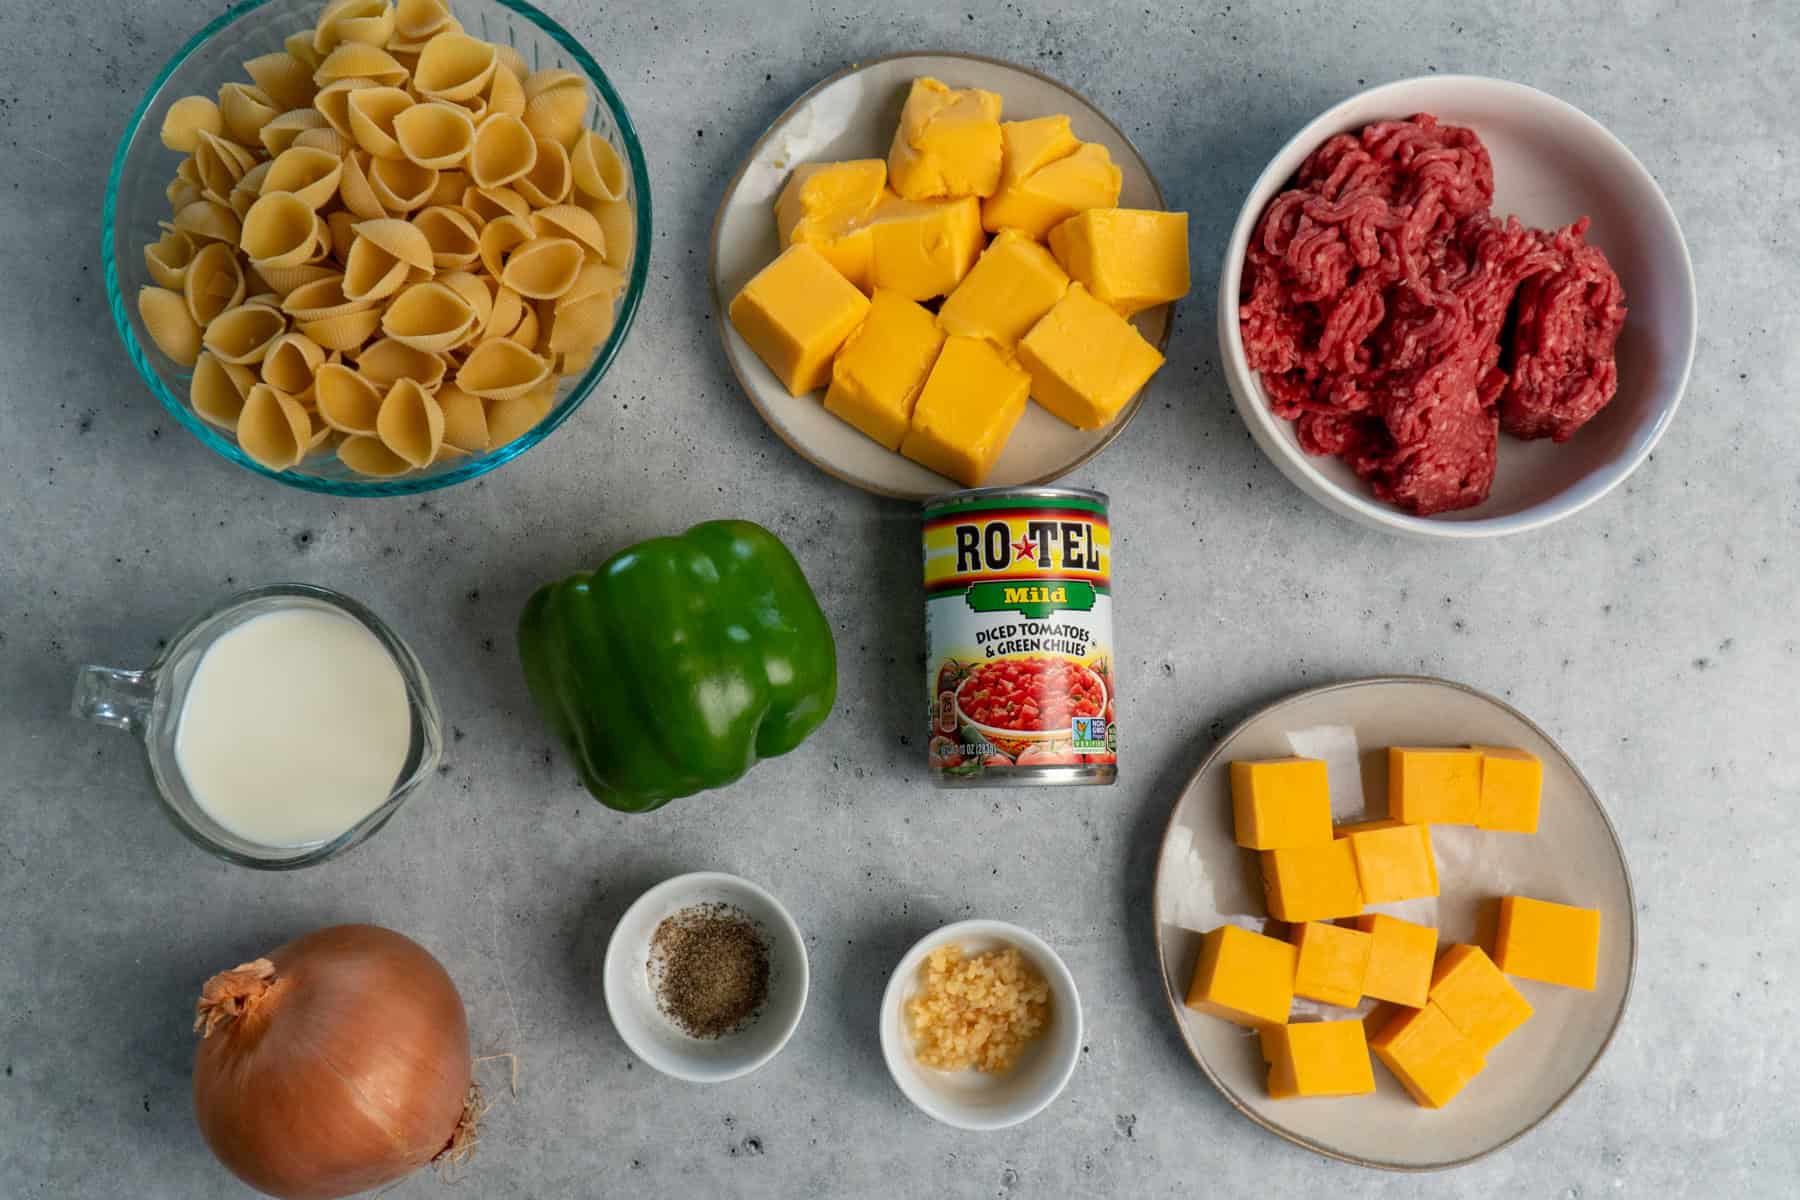 All the ingredients to make Rotel pasta.